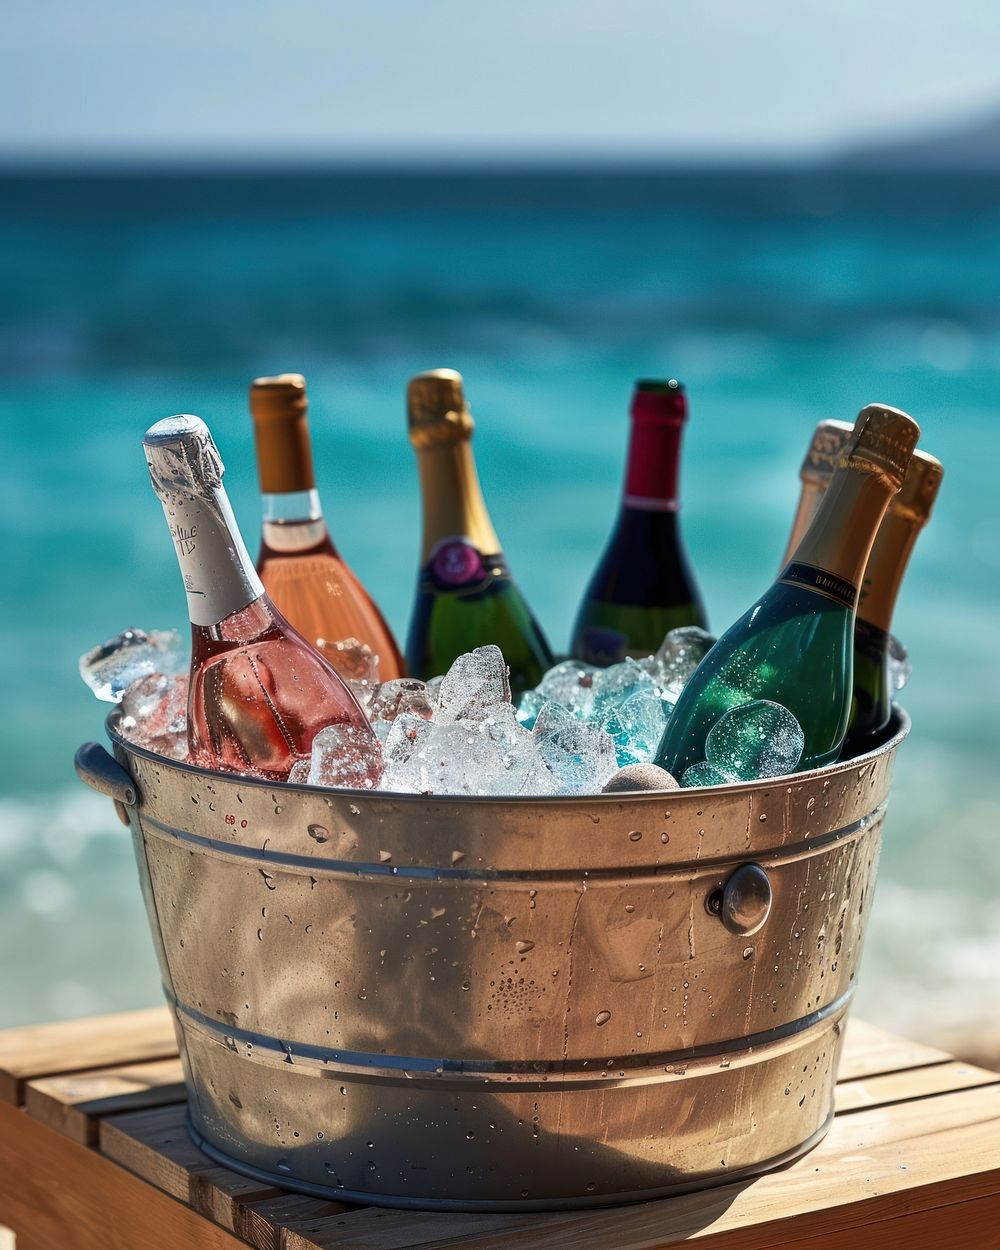 Assorted wine bottles in a metal bucket full of ice put on wood table against beach view vacation outdoors summer.